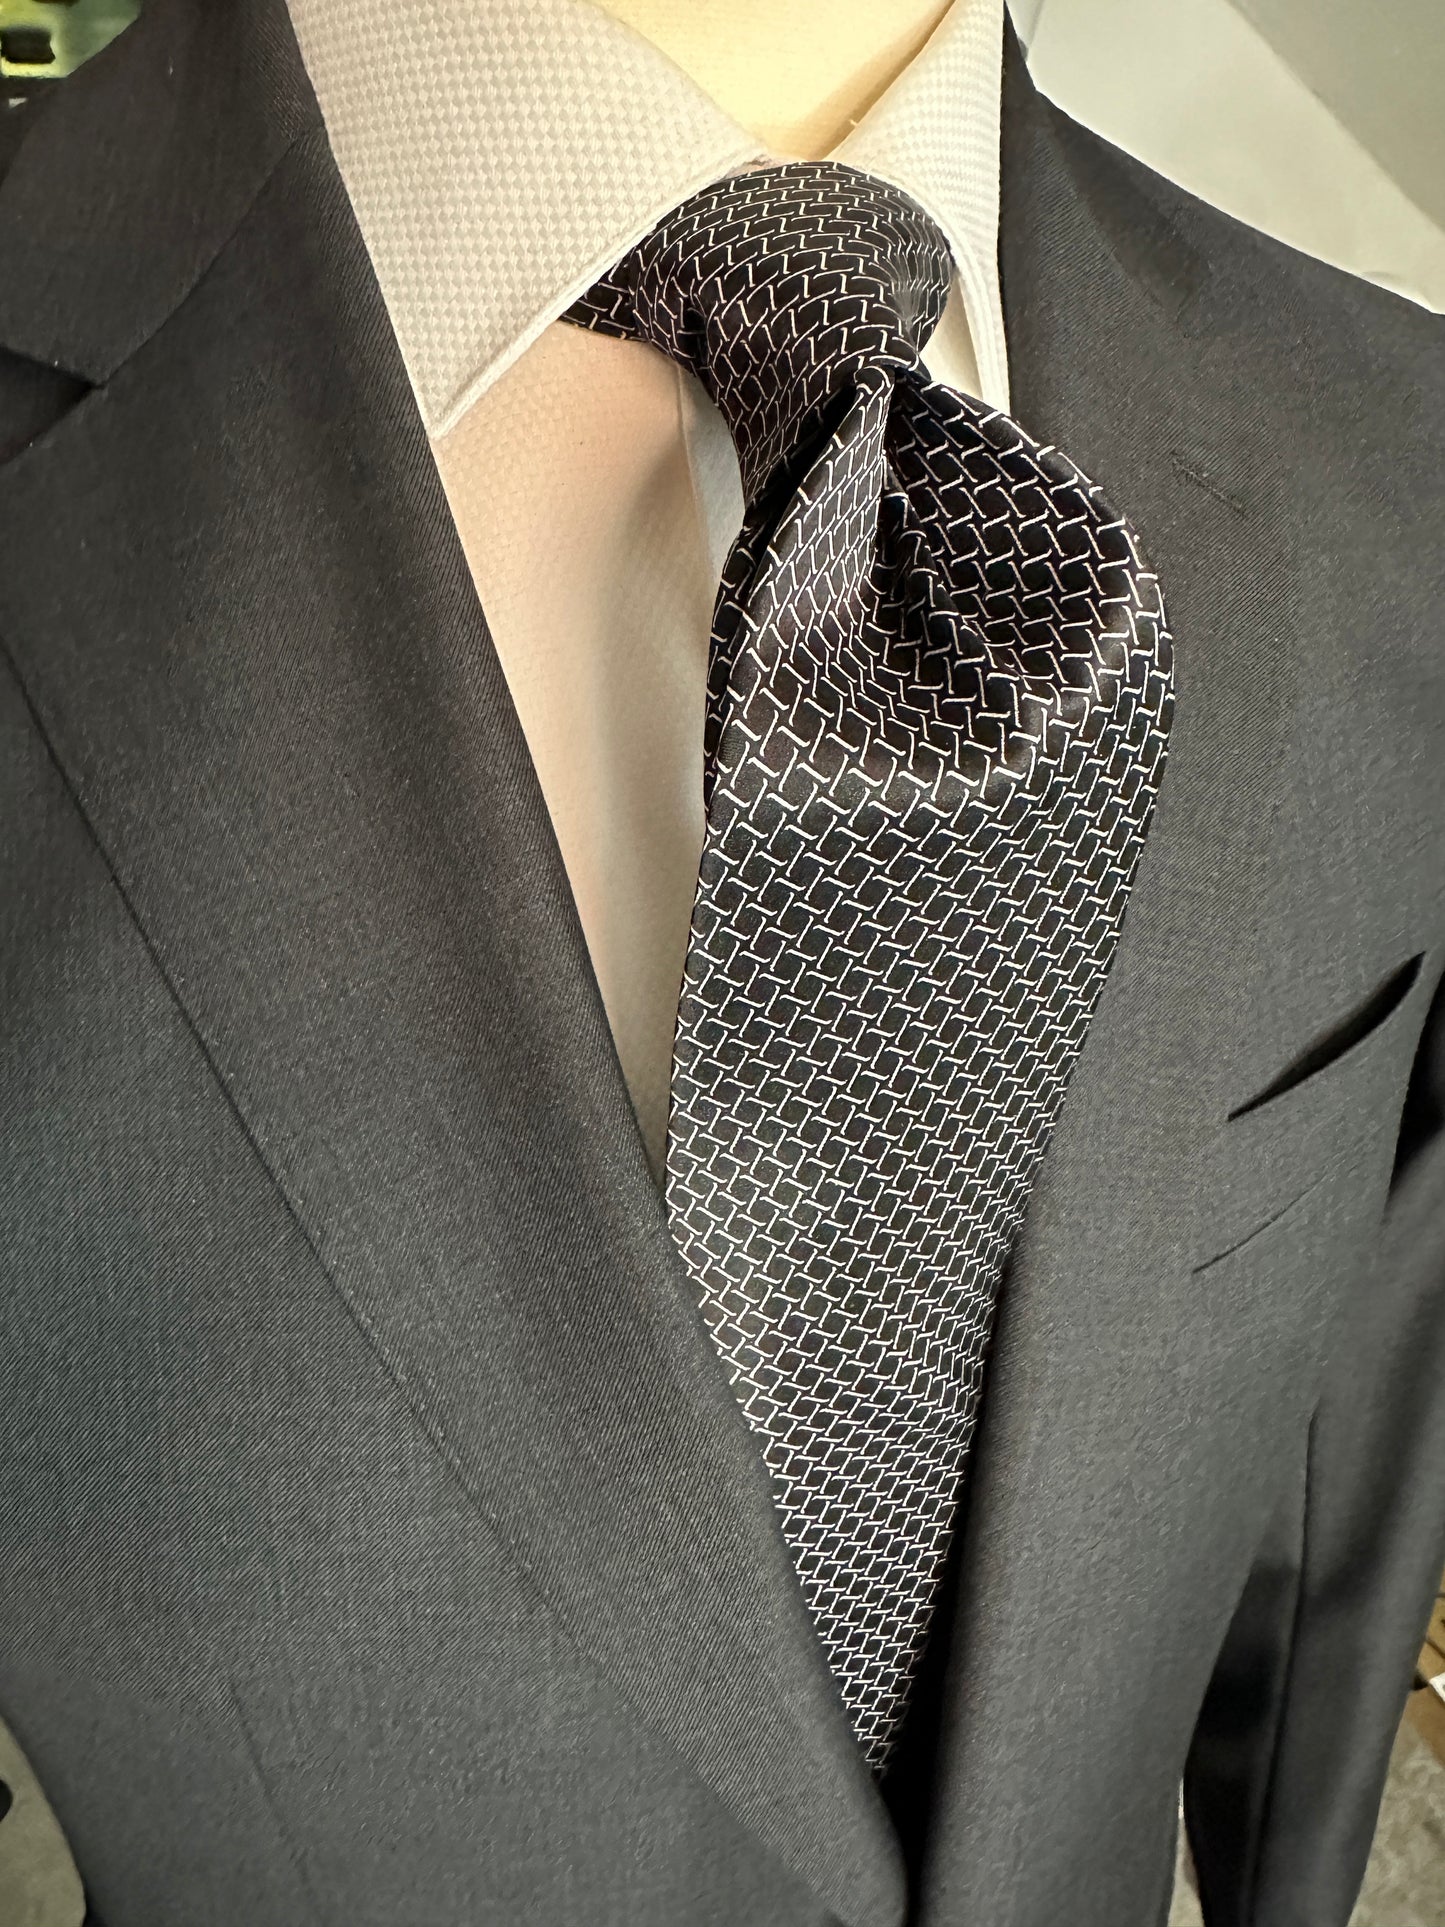 This satin finish 100% silk necktie has a very interesting all over geometric pattern of interlocking white links almost chain link in style. The silk is very smooth to the touch and has a natural luster that shines in certain light. This is a serious tie. Great for those business meetings, court dates, dinners, evening events and all around more formal attire. This is best paired with a fancy white or tone on tone white dress shirt.